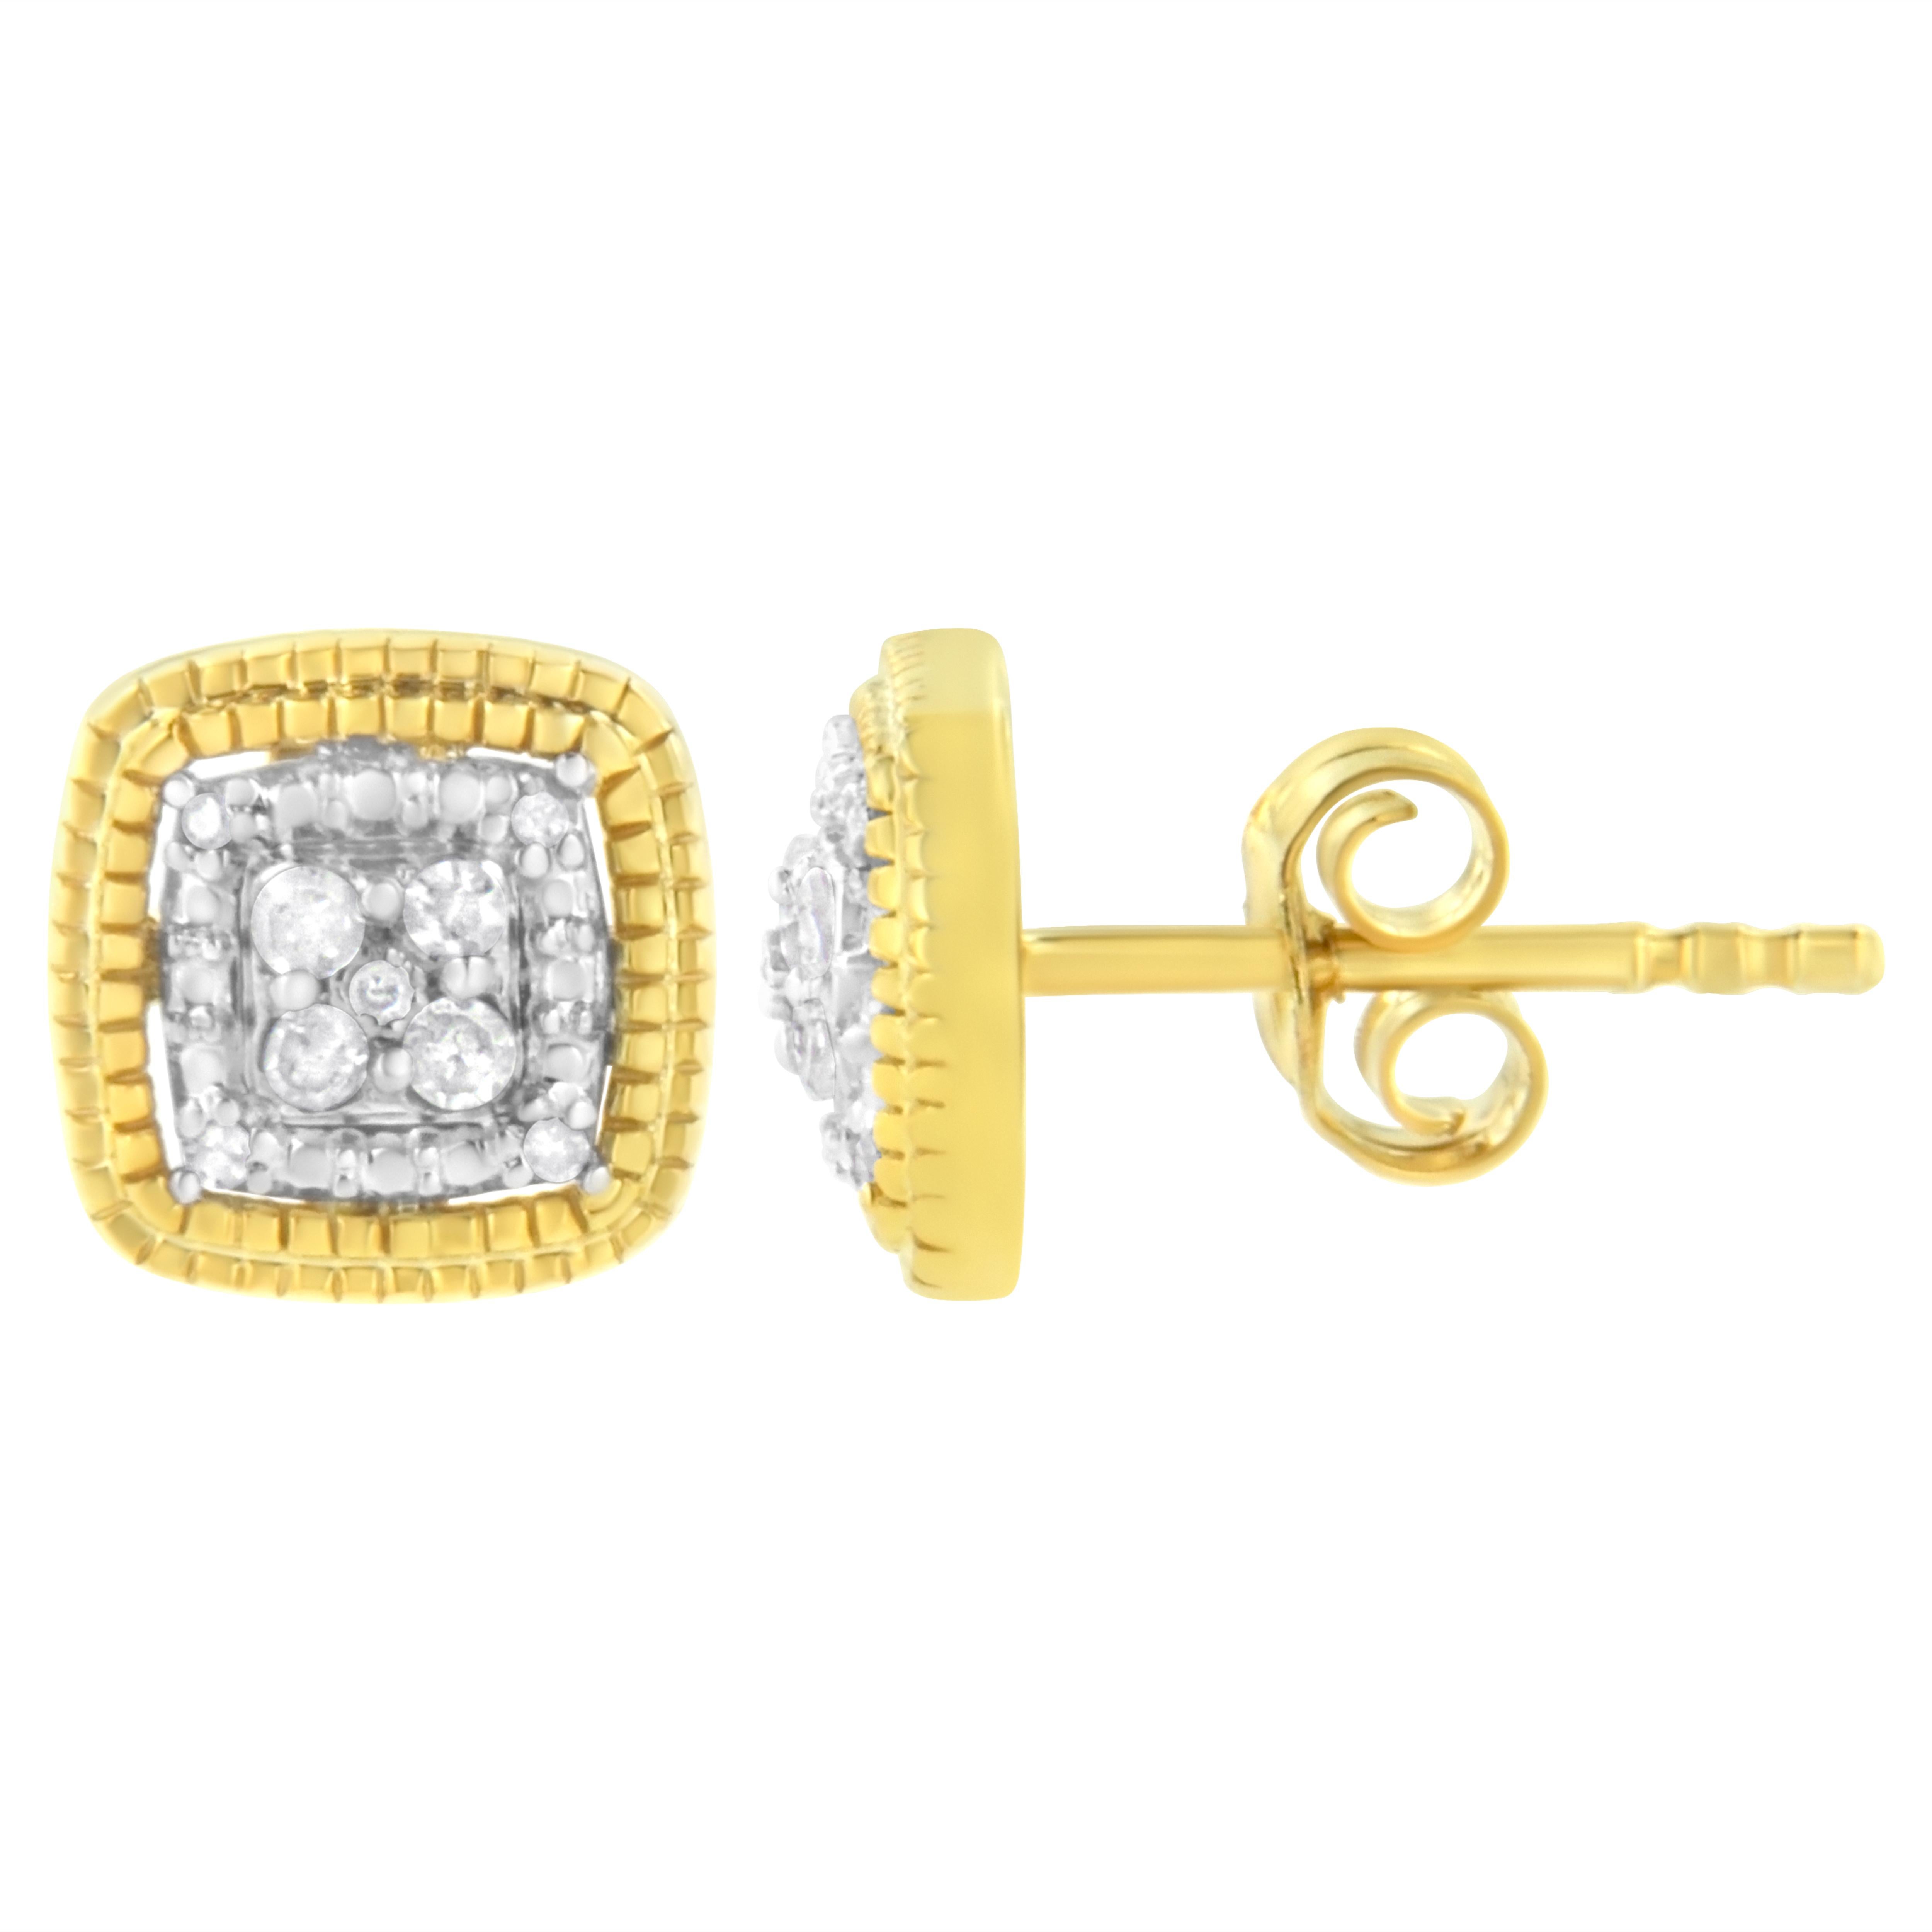 Petite and elegant, these 10k yellow gold plated .925 sterling silver hoops will sparkle on your ears. These earrings are embellished with 7 prong-set diamonds each. The stones are round-cut and champagne in color. These hoops will add a touch of